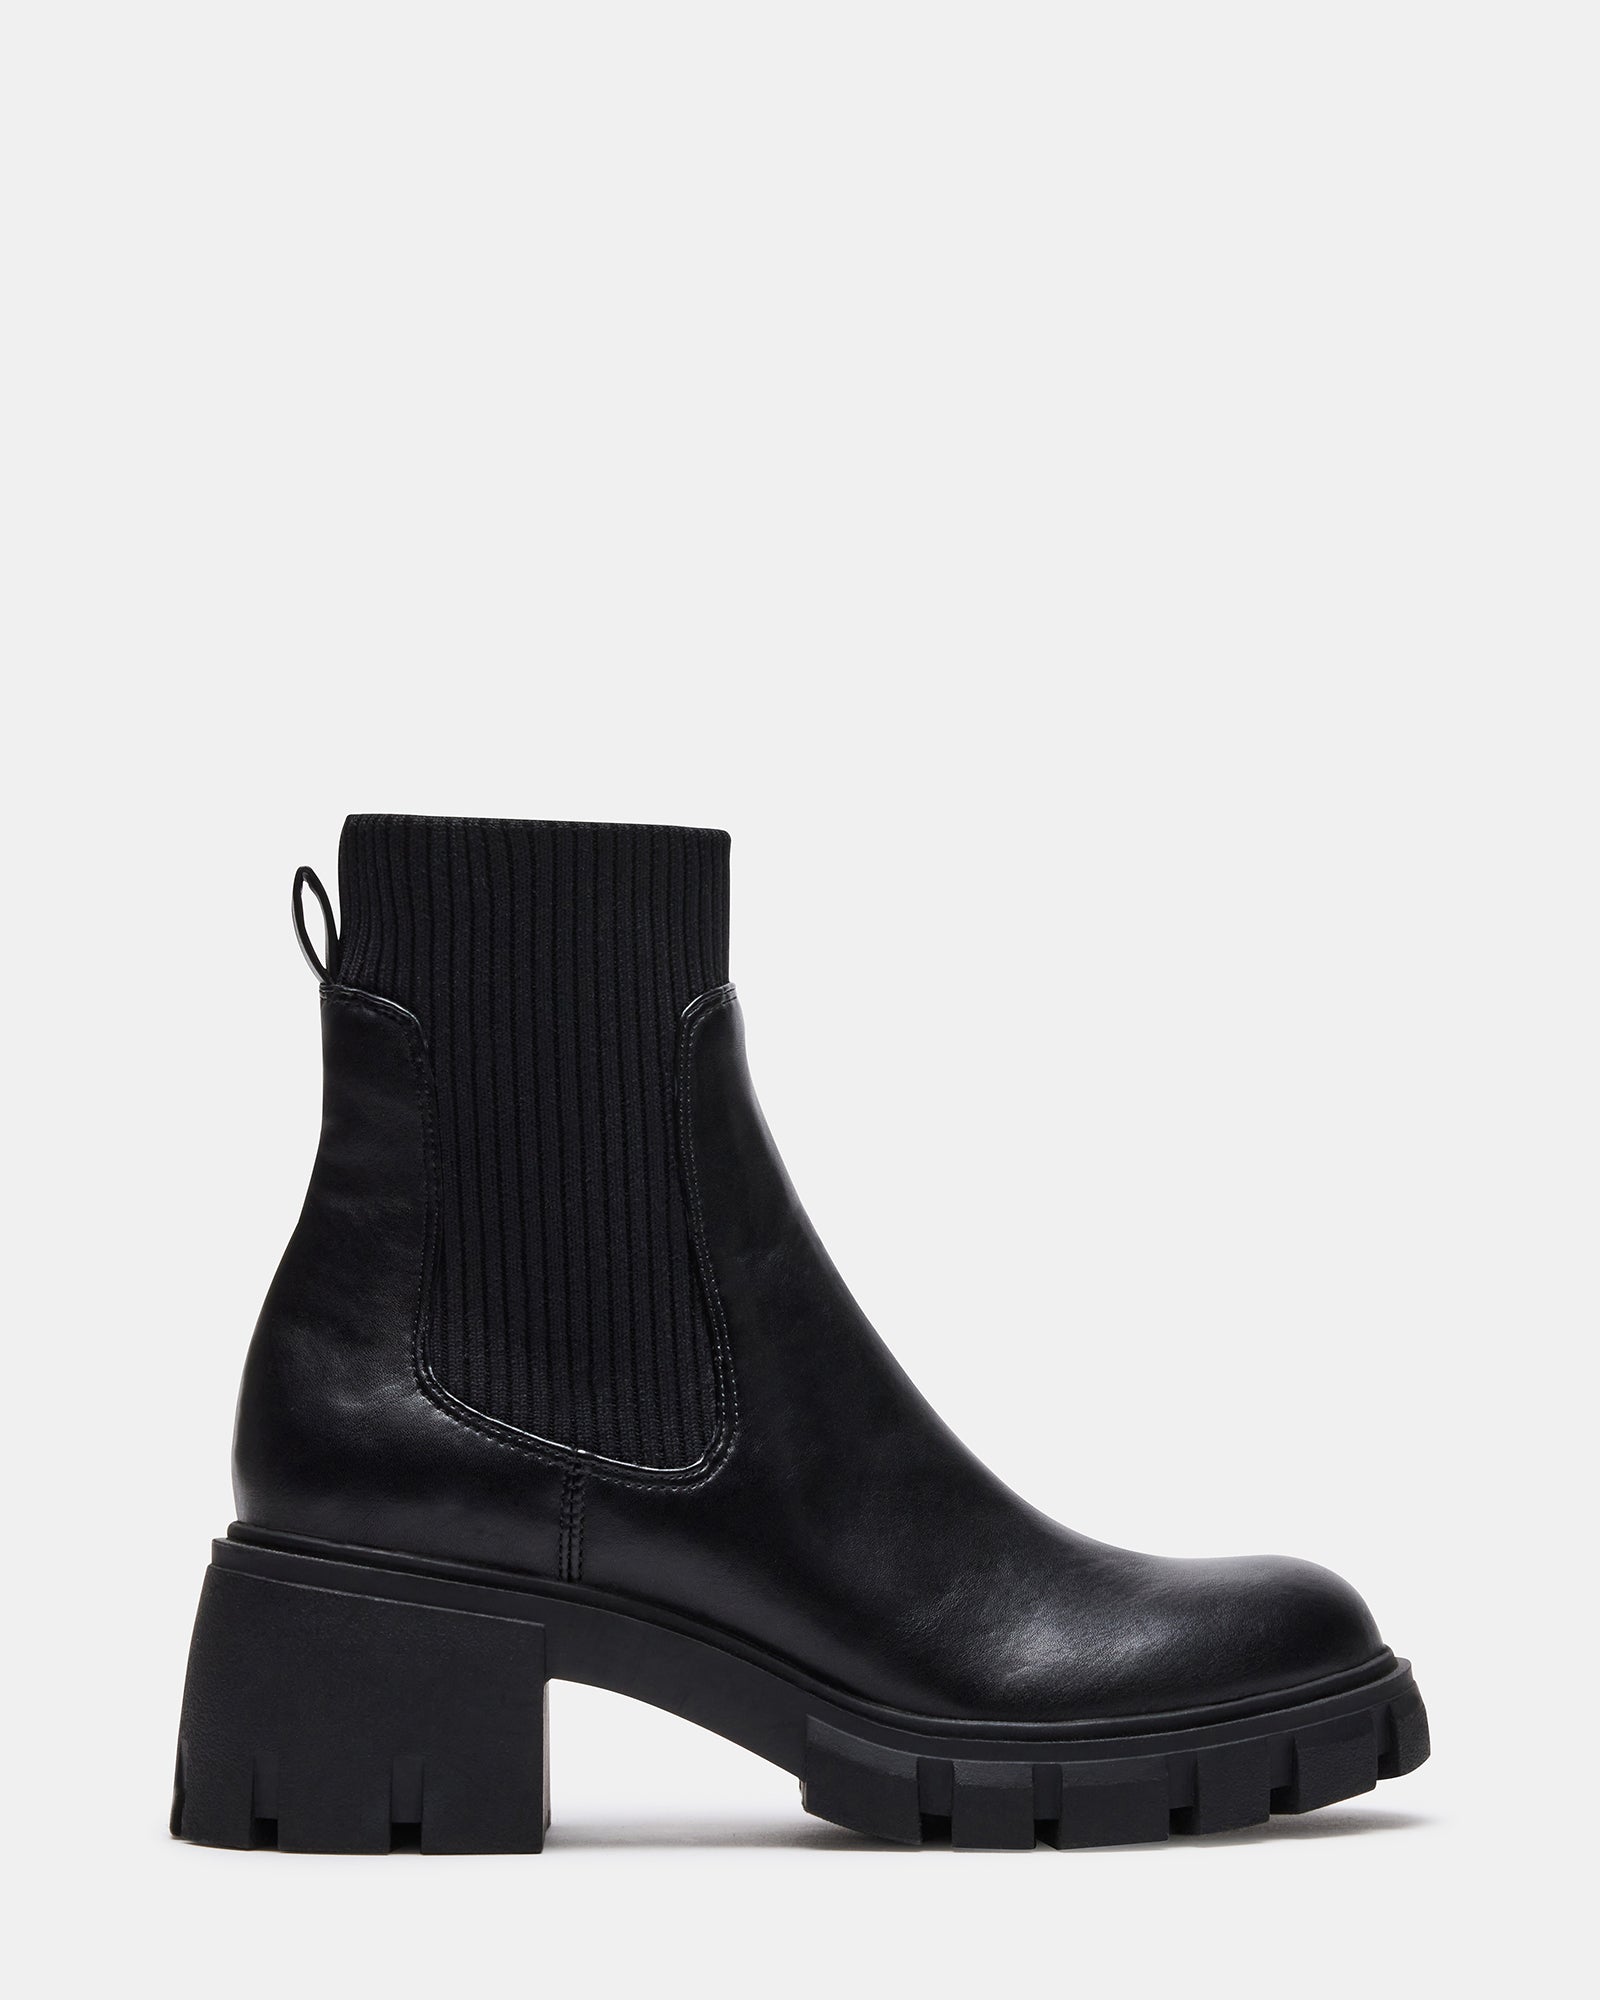 HUTCH Black Ankle Boots for Women | Stacked Block Heel & Lug Sole ...